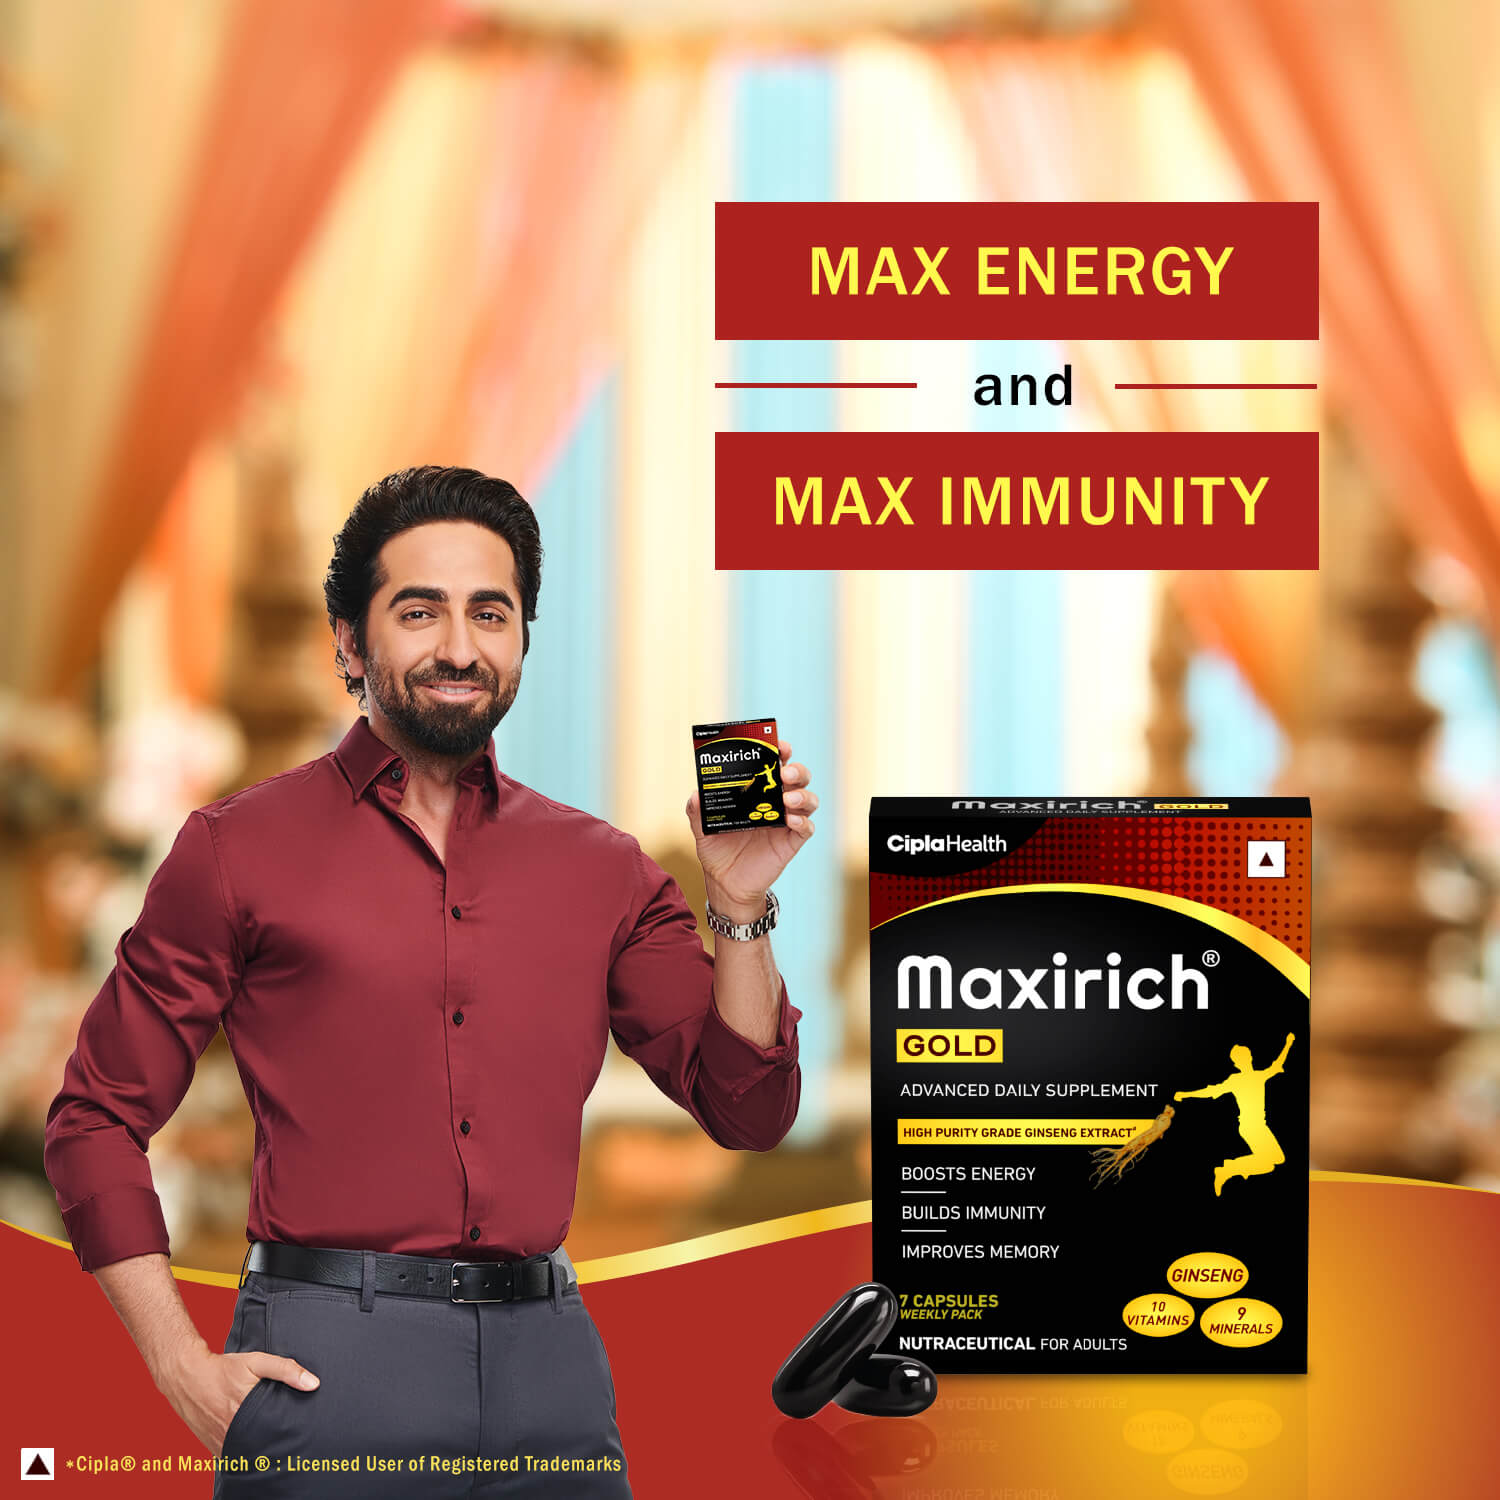 Maxirich Daily Multivitamin Helps Complete You Nutrition